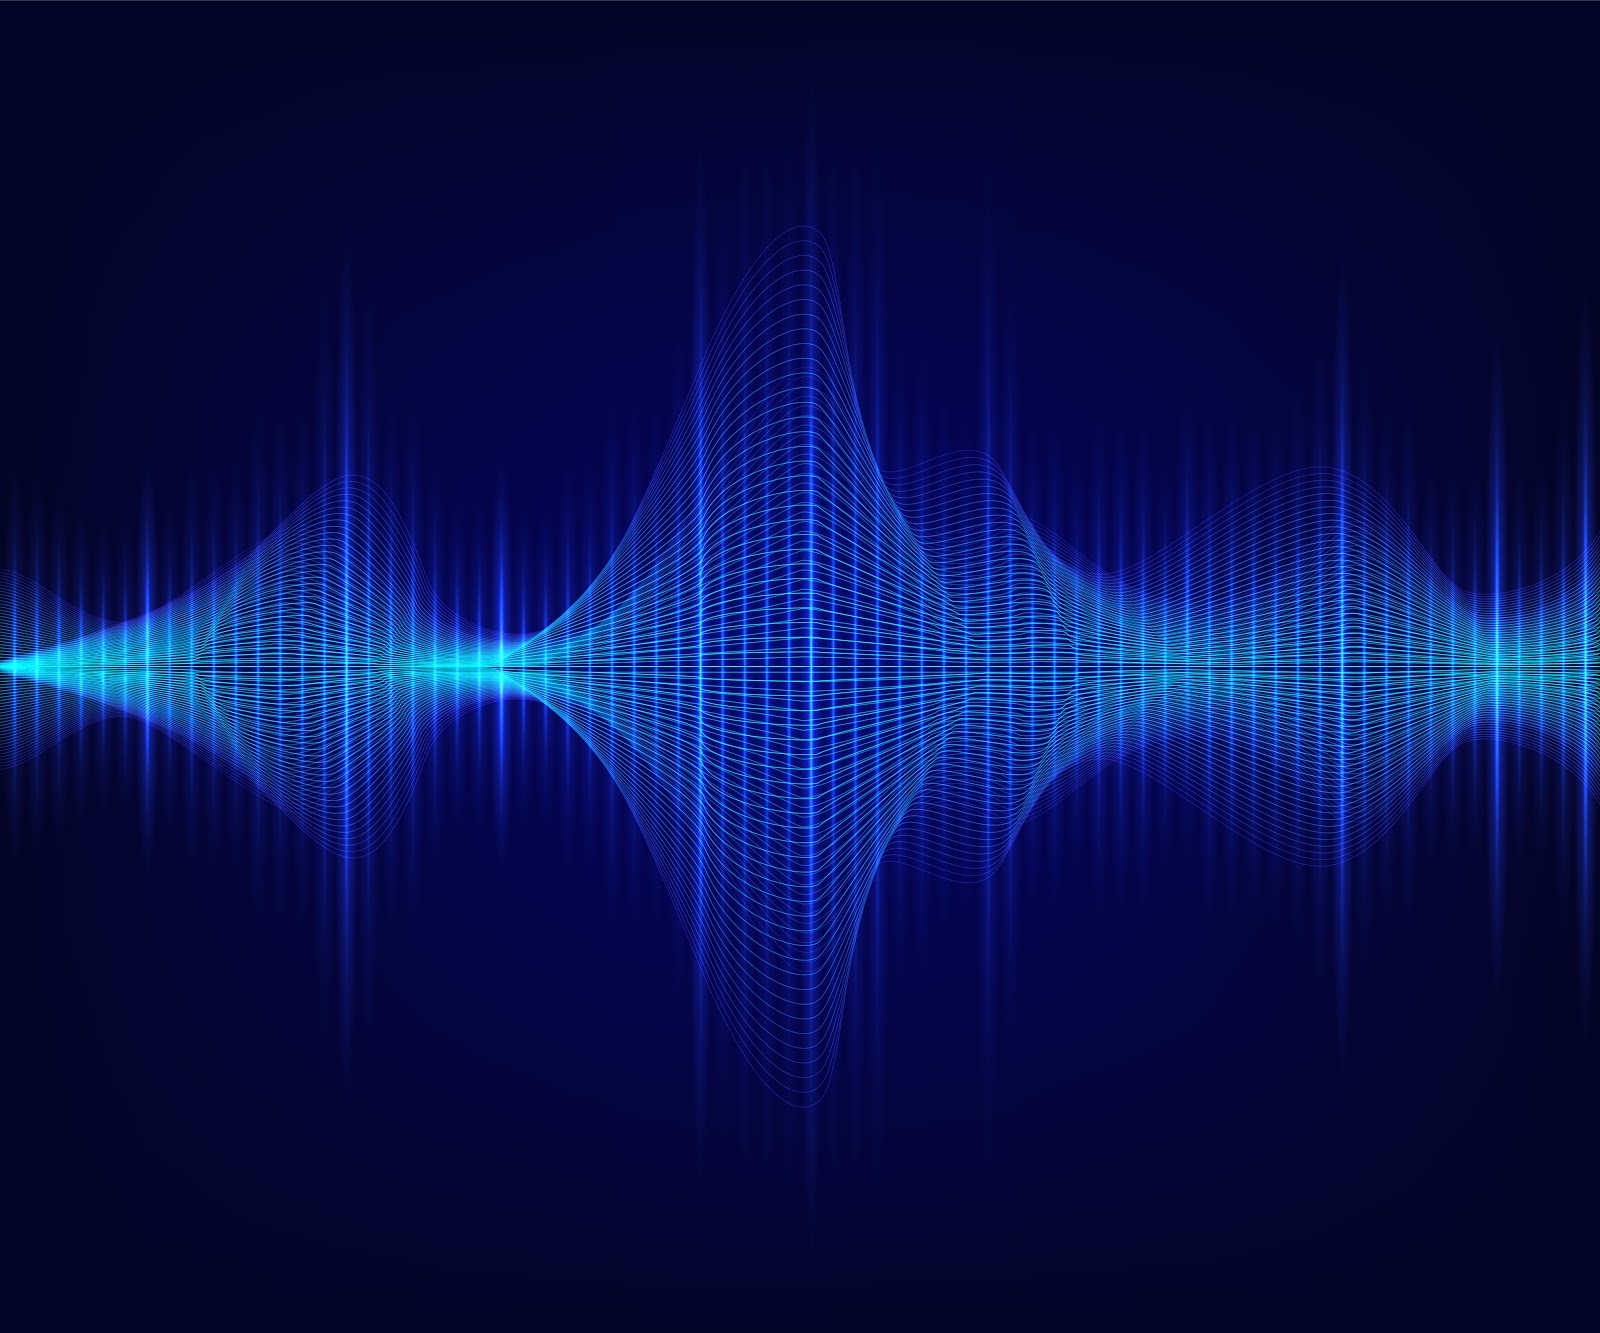 A graphic depiction of audio frequency